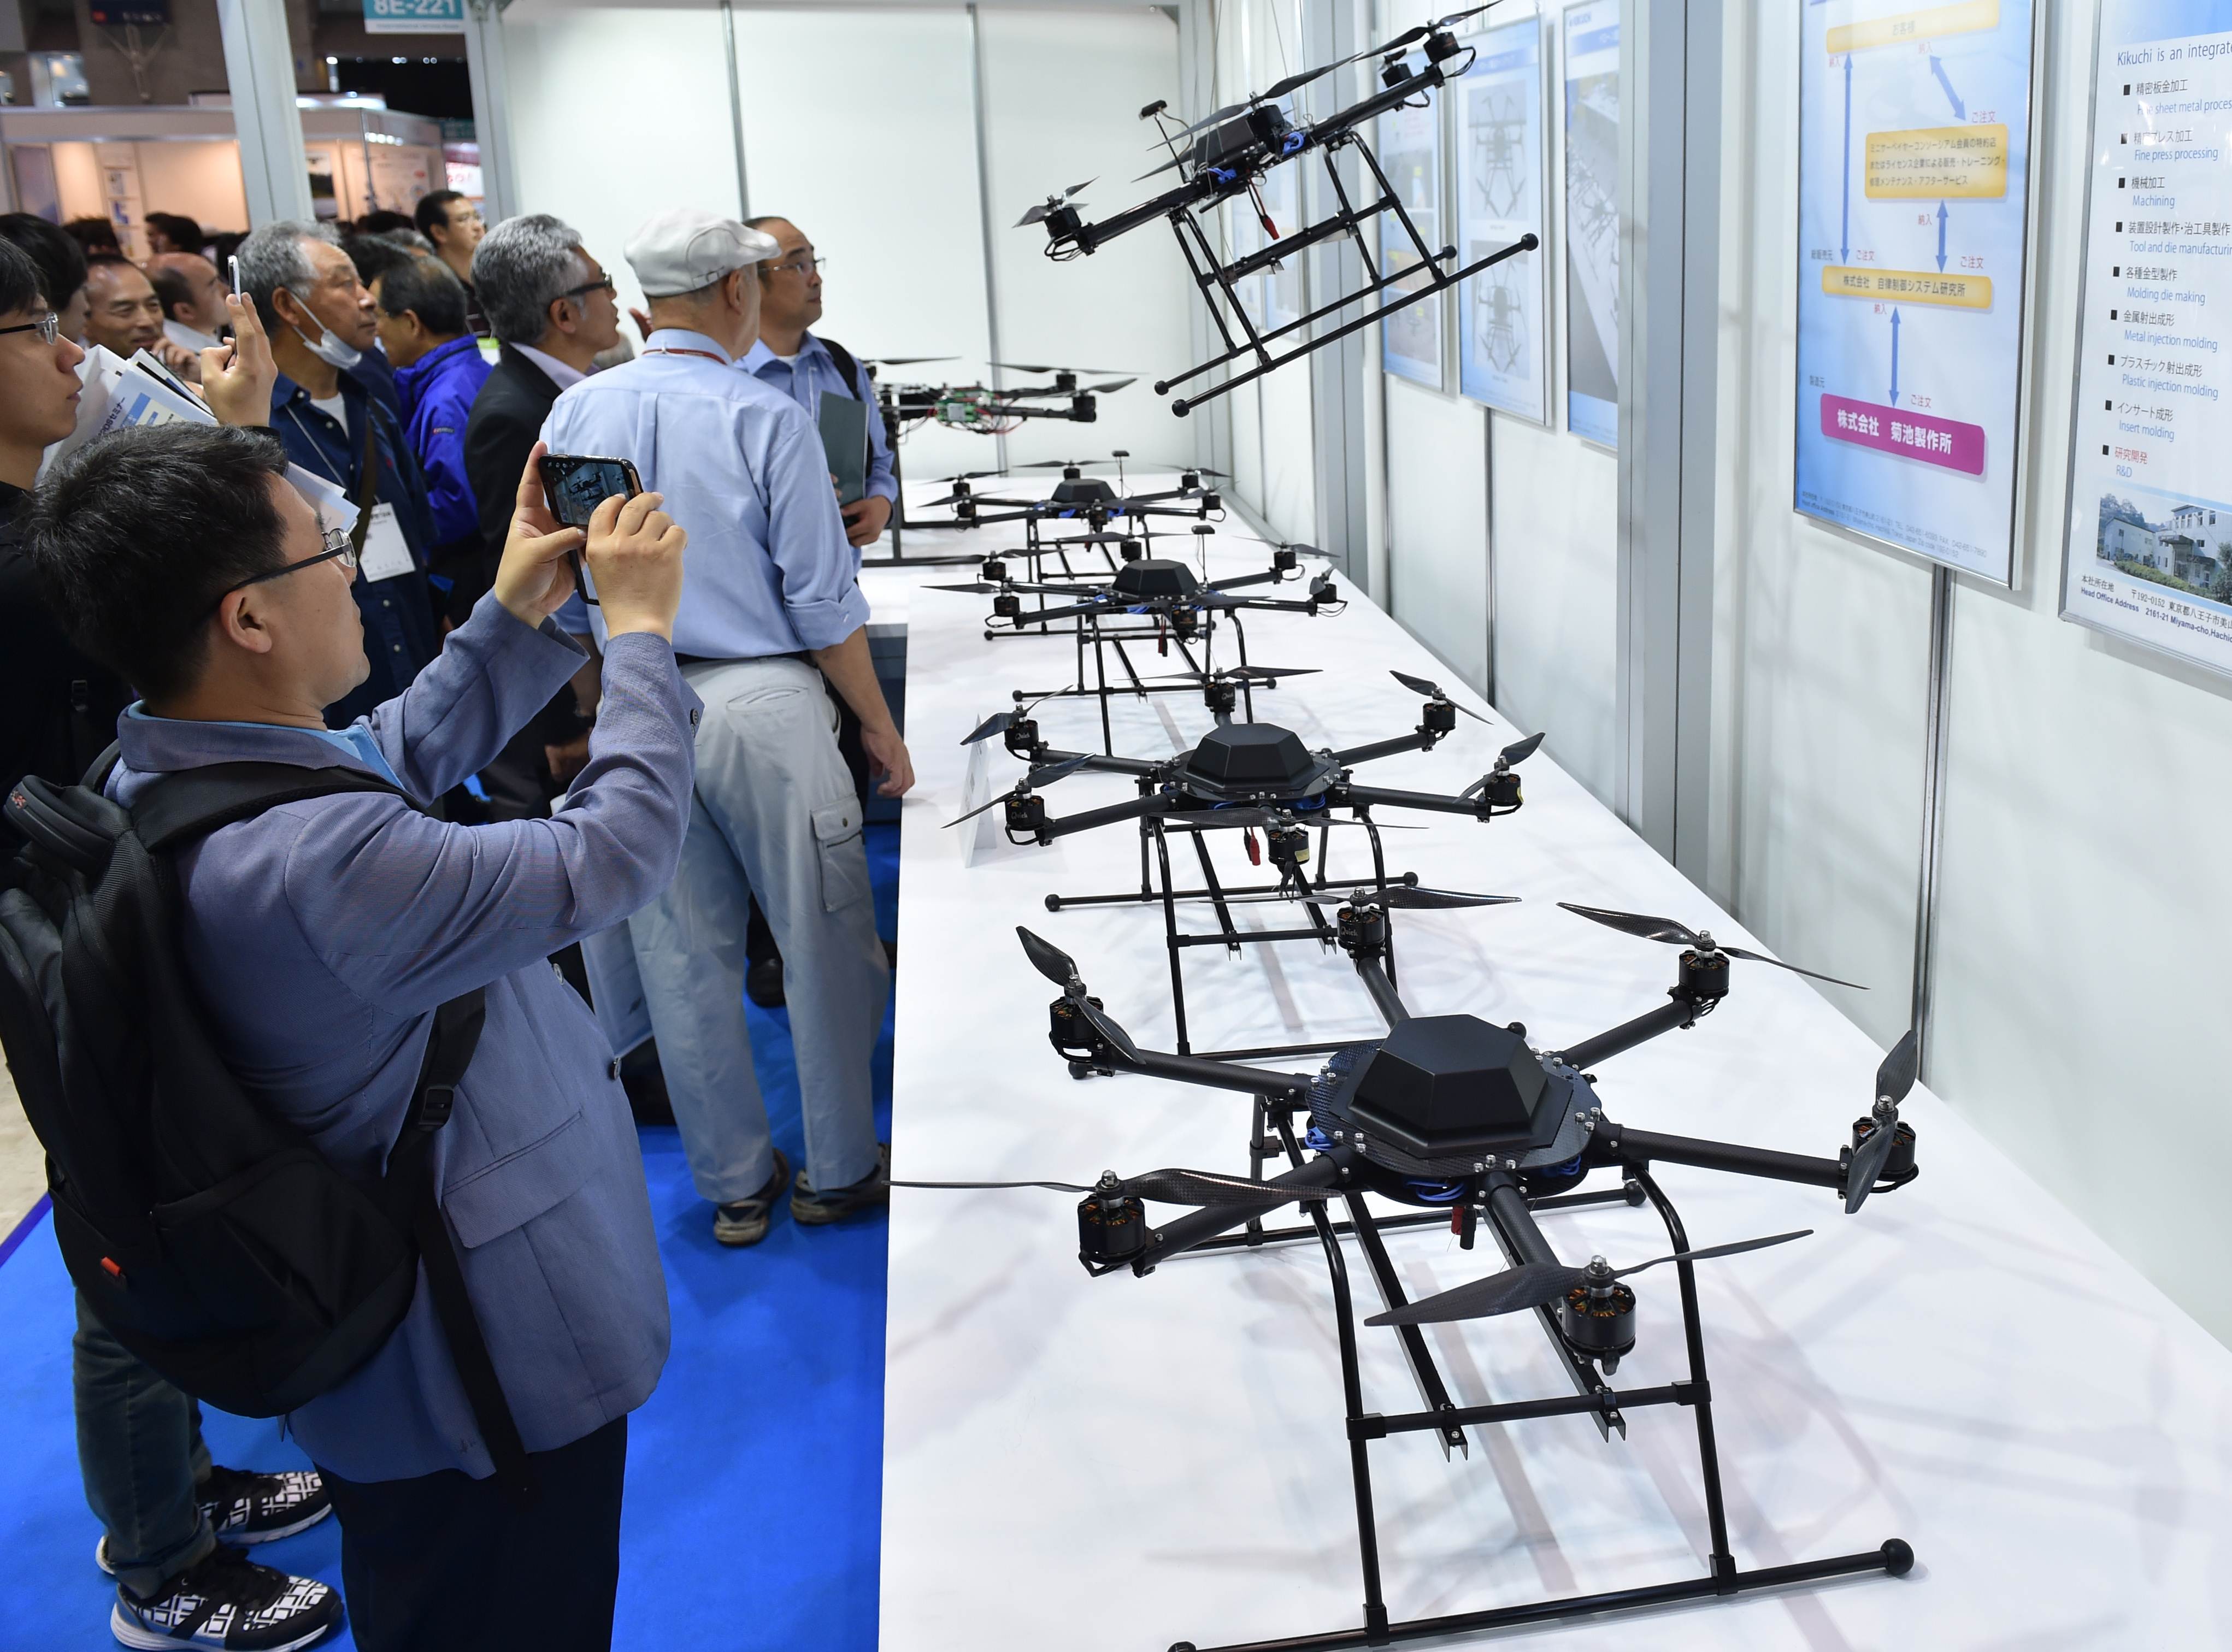 Visitors gather in front of an exhibition booth displaying recent models of drones during the International Drone Expo in Tokyo on May 20, 2015. Photo: AFP